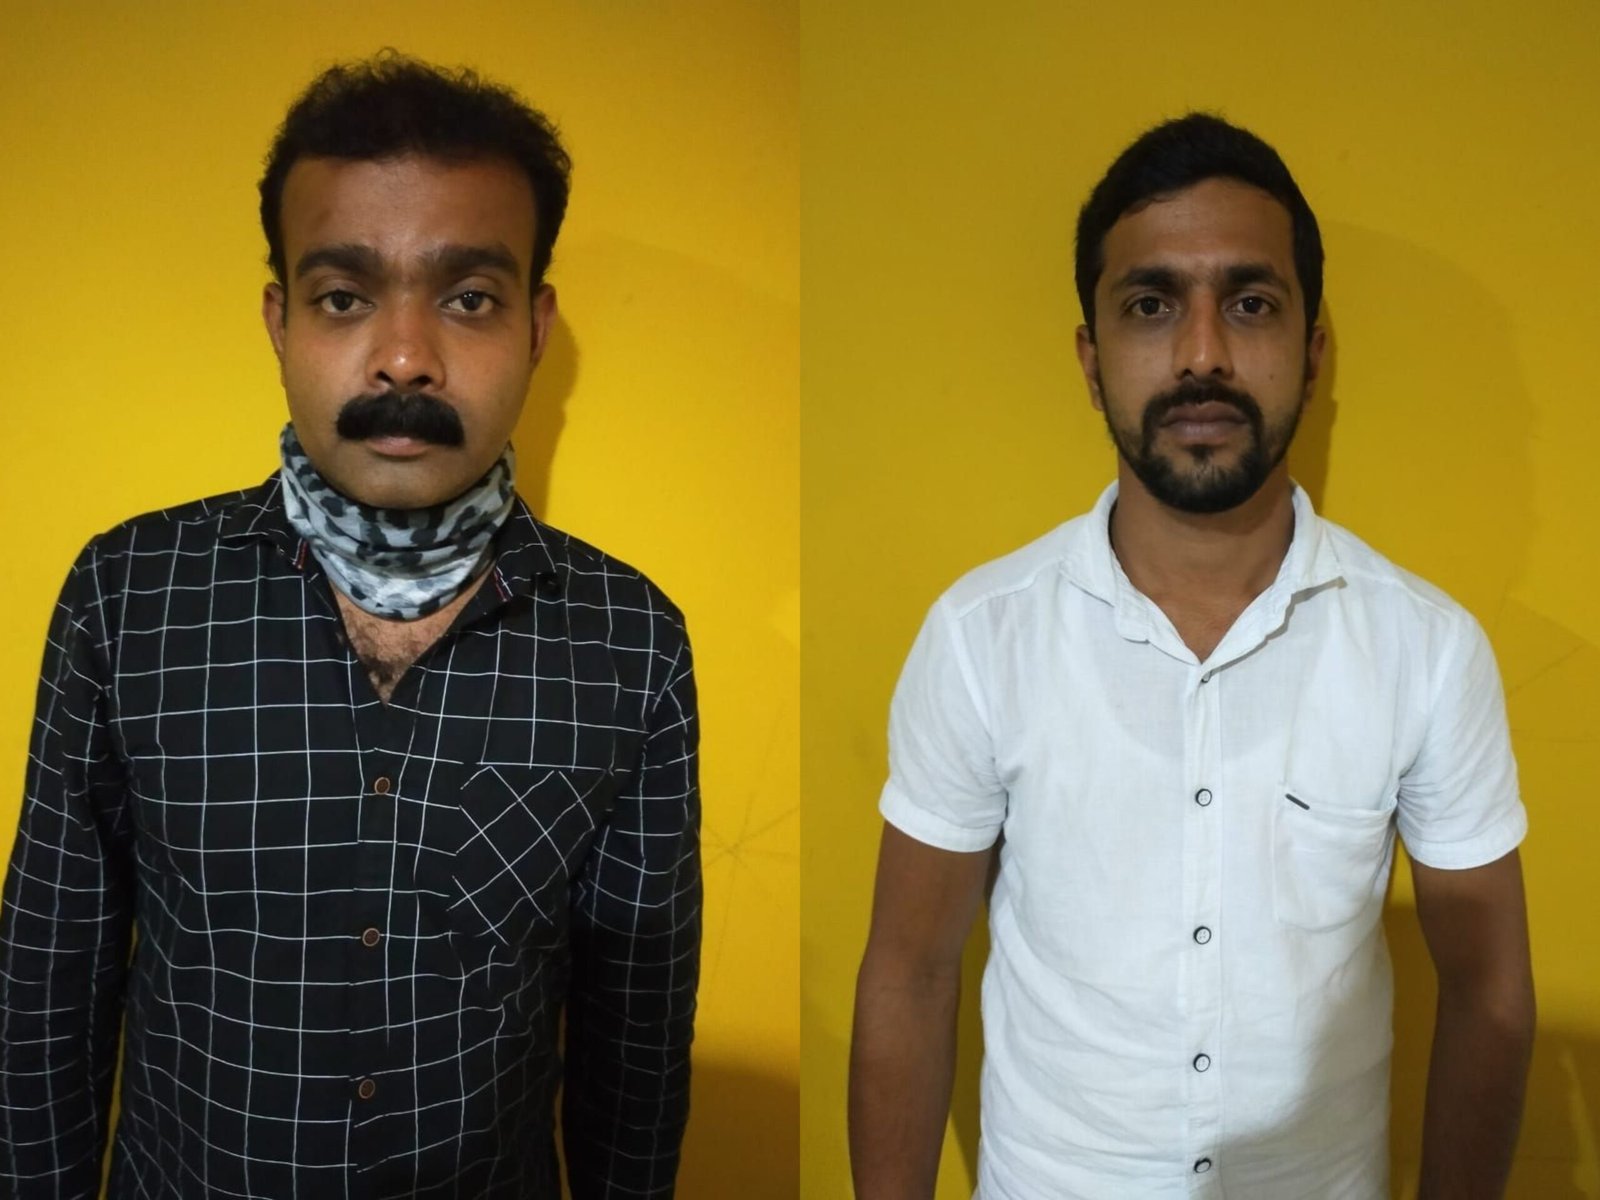 Bar owner’s killing: 4 arrested      2 of the murder accused try to assault cops, are shot at  